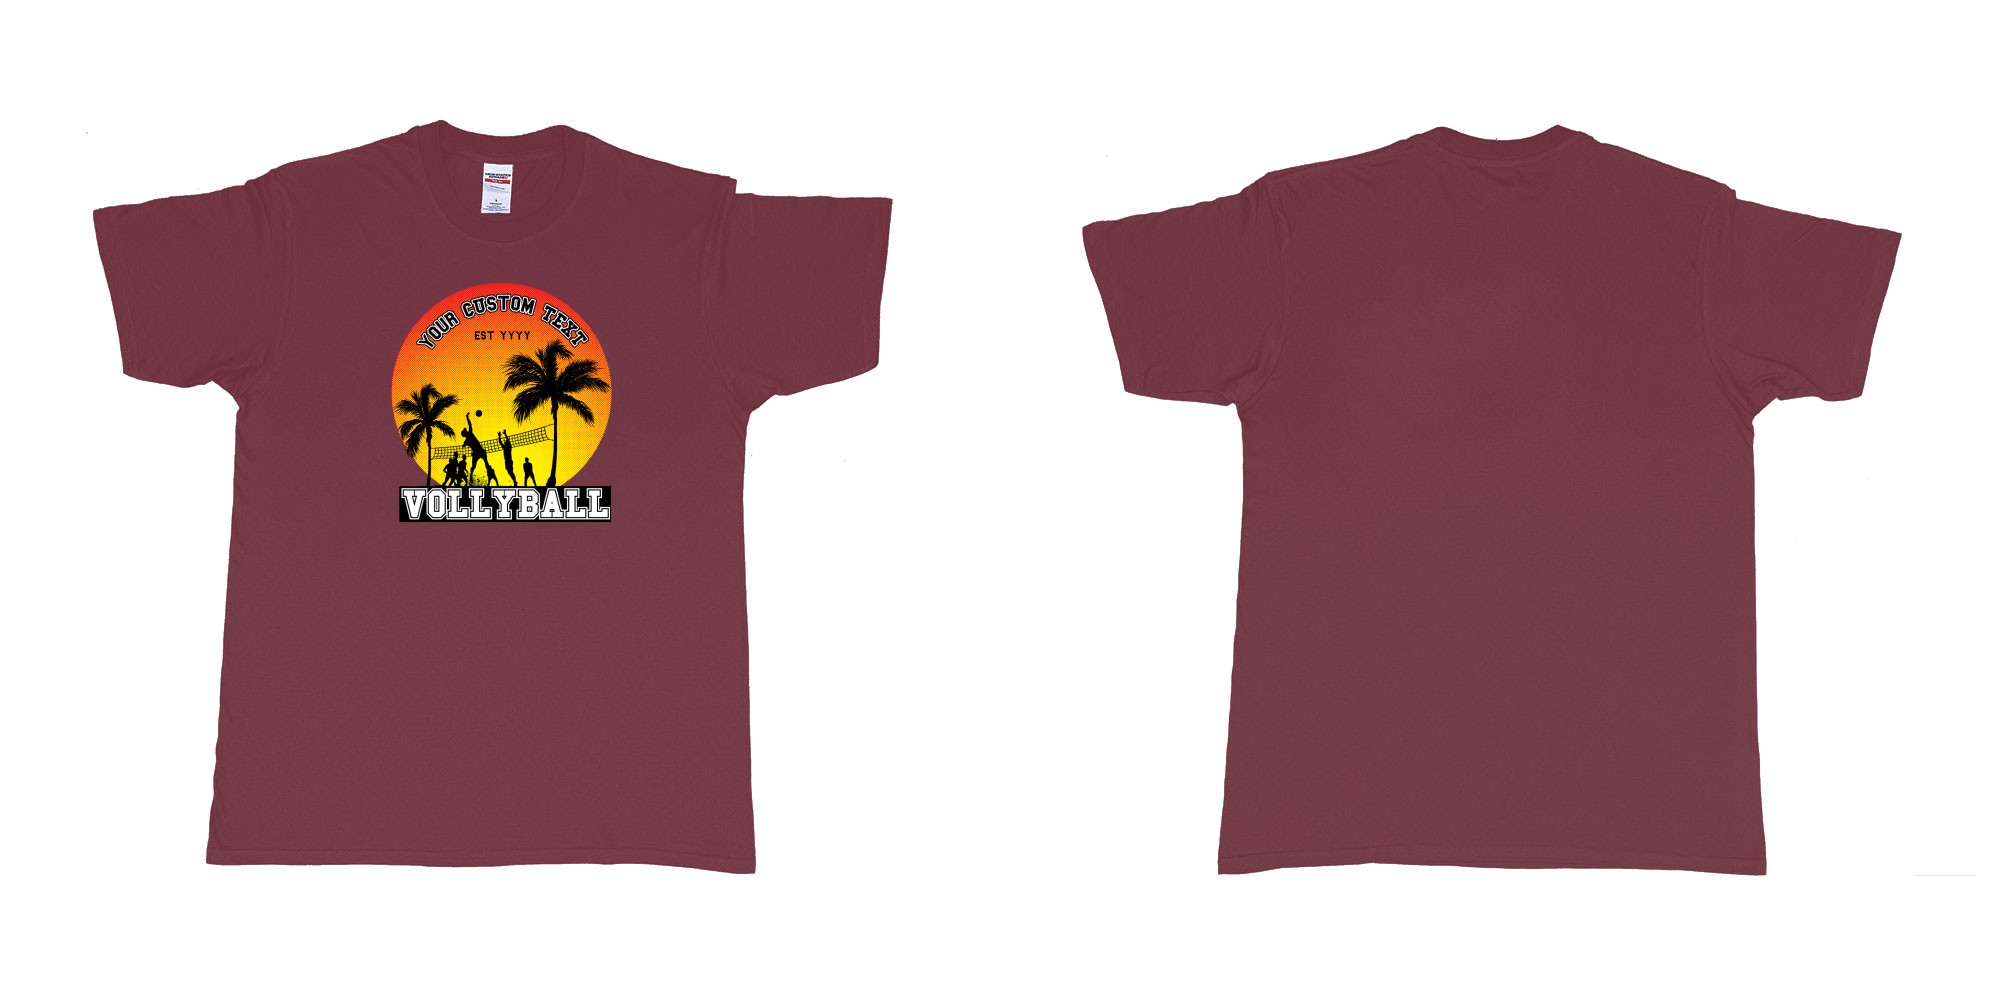 Custom tshirt design sunset volleyball t shirt with a sunset view and your custom print text and year in fabric color marron choice your own text made in Bali by The Pirate Way